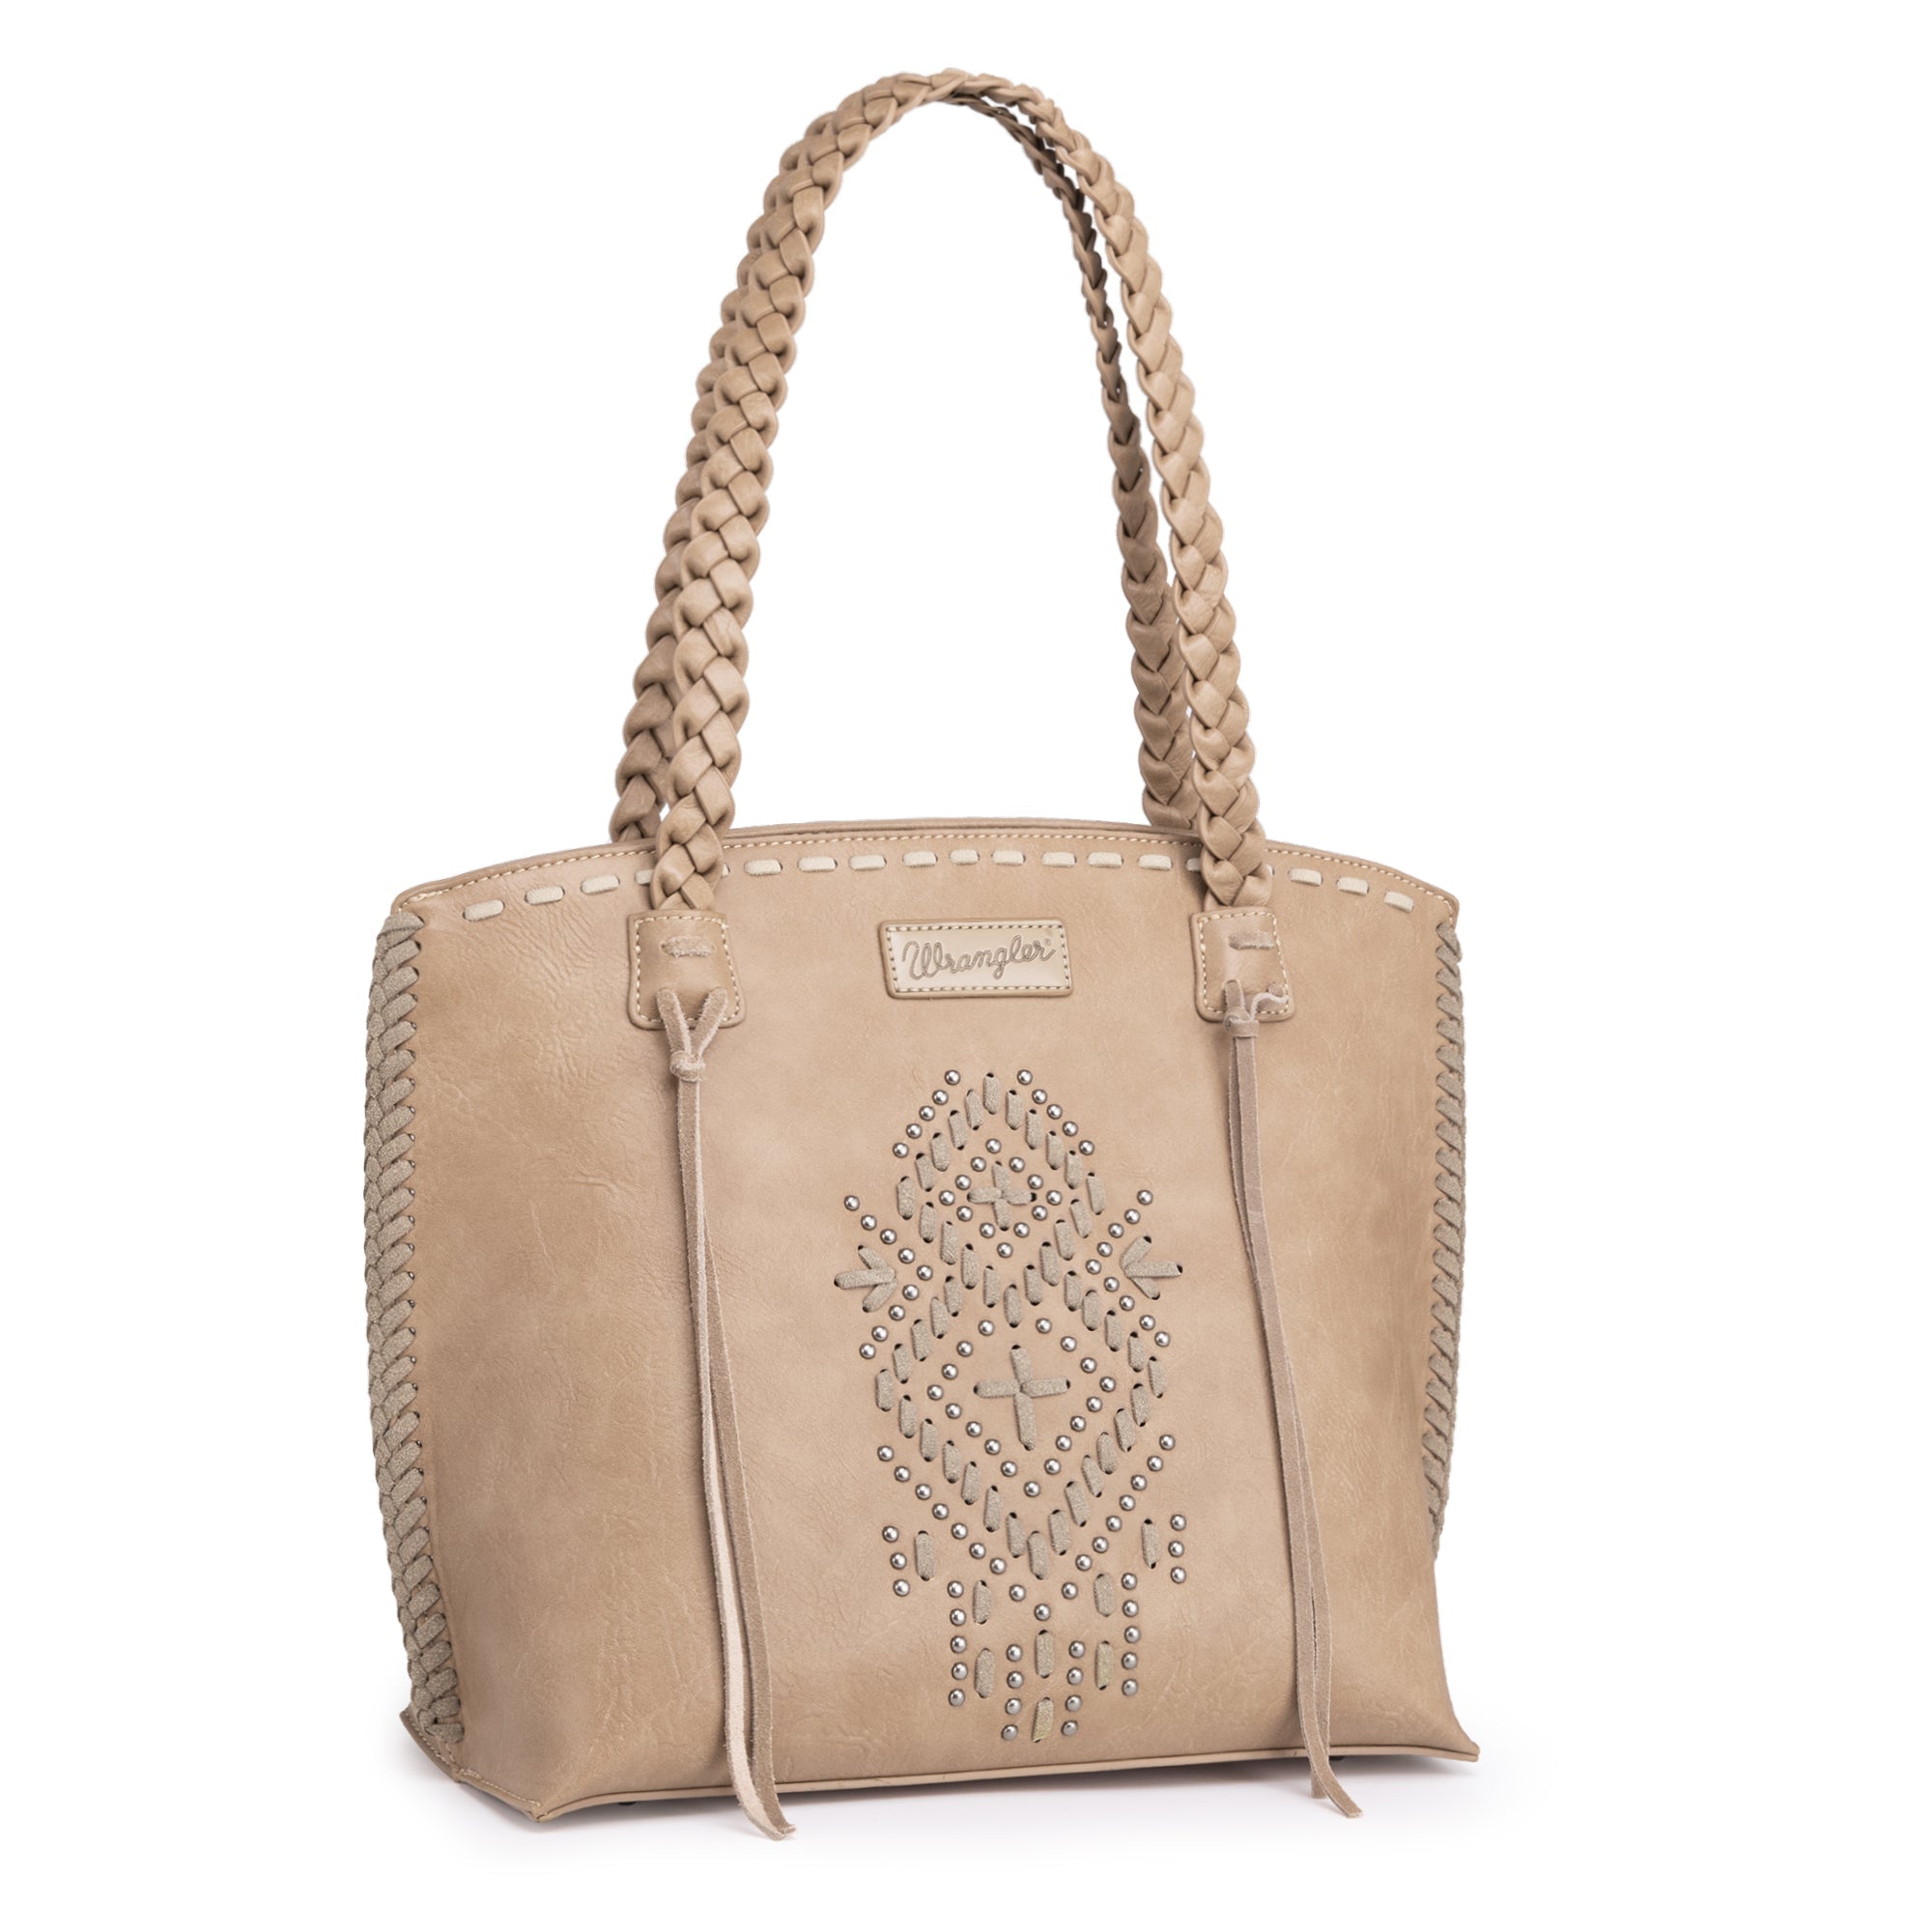 Wrangler Tribal Whipstitch Braided Strap Tote - Cowgirl Wear